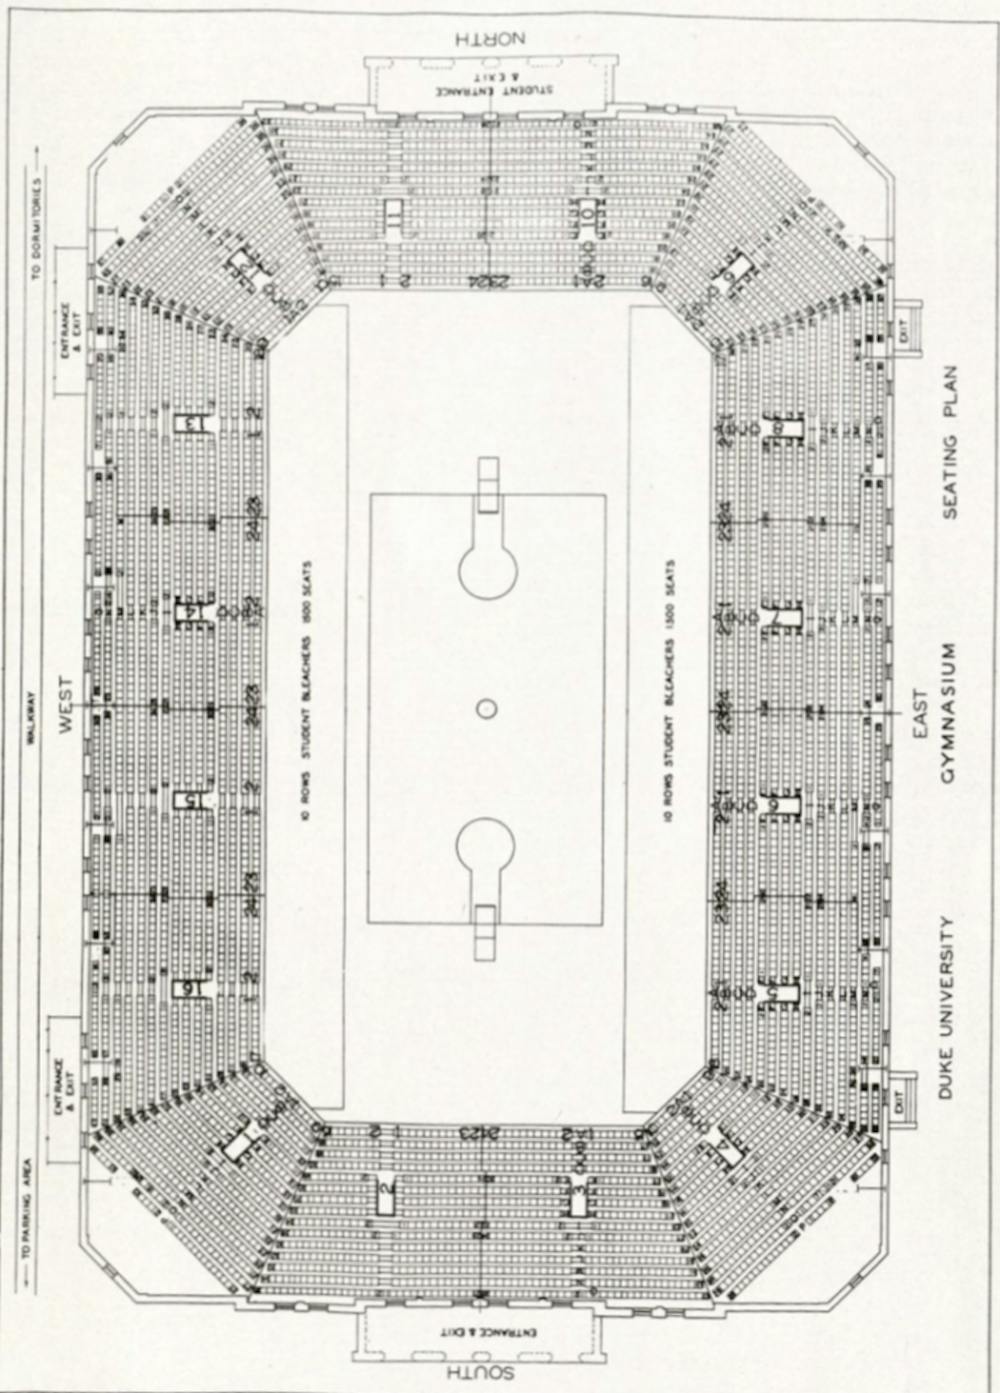 Share 134+ imagen cameron indoor stadium seating chart with rows and ...